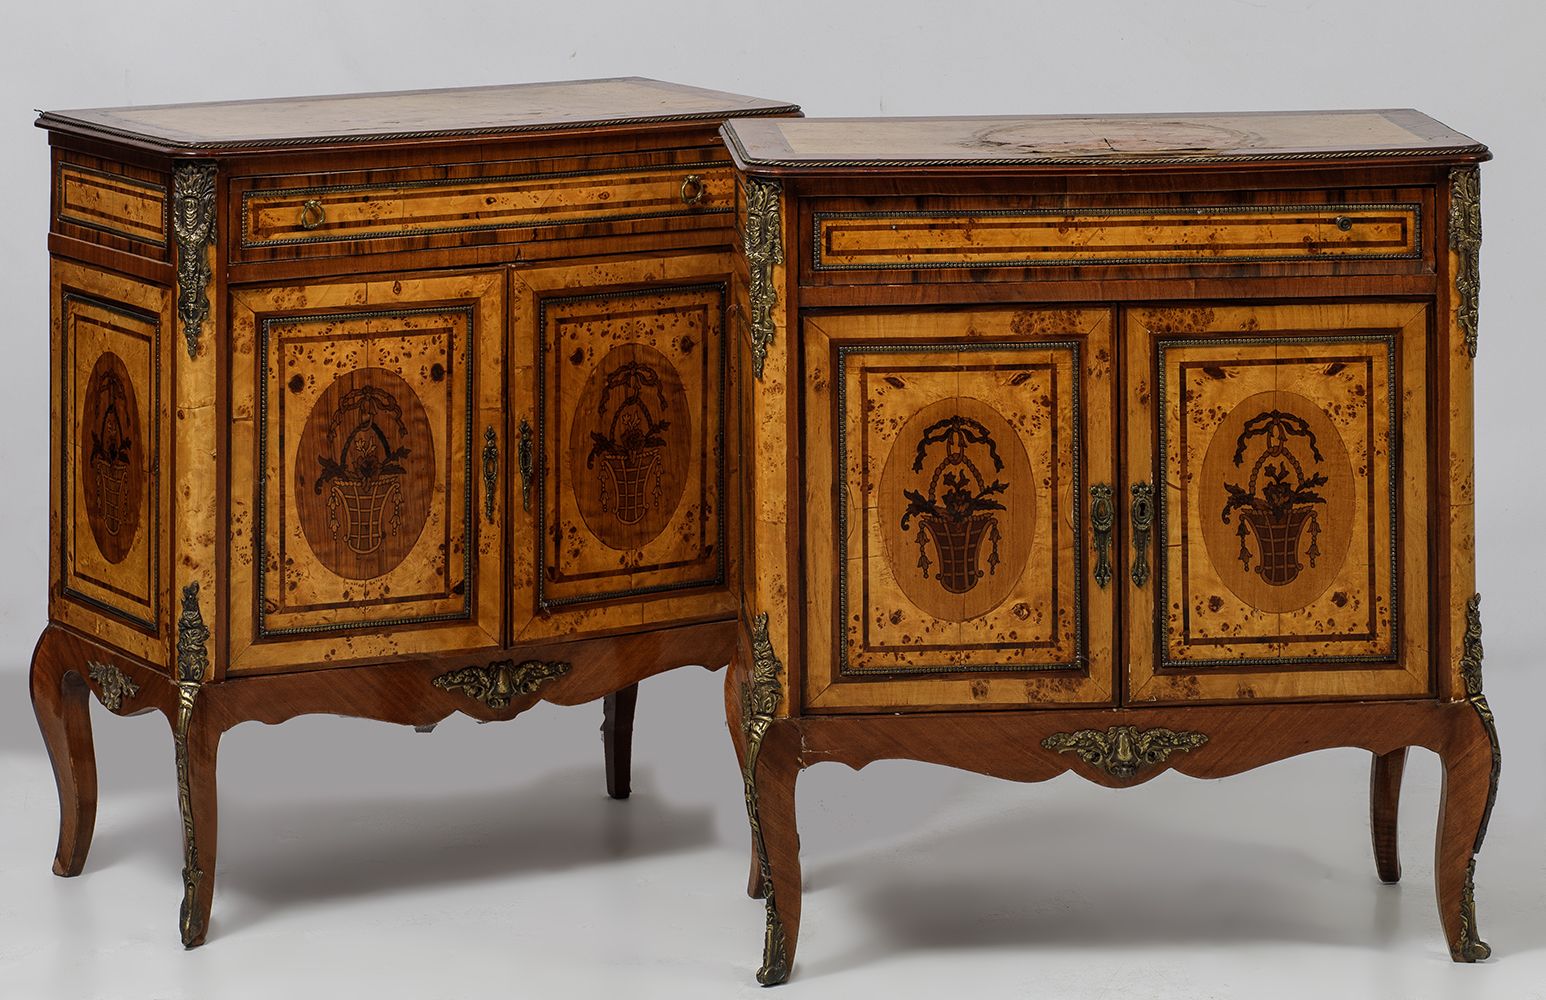 Pair of Regency-style inlaid marquetry tiles Paire de commodes de style Transiti&hellip;